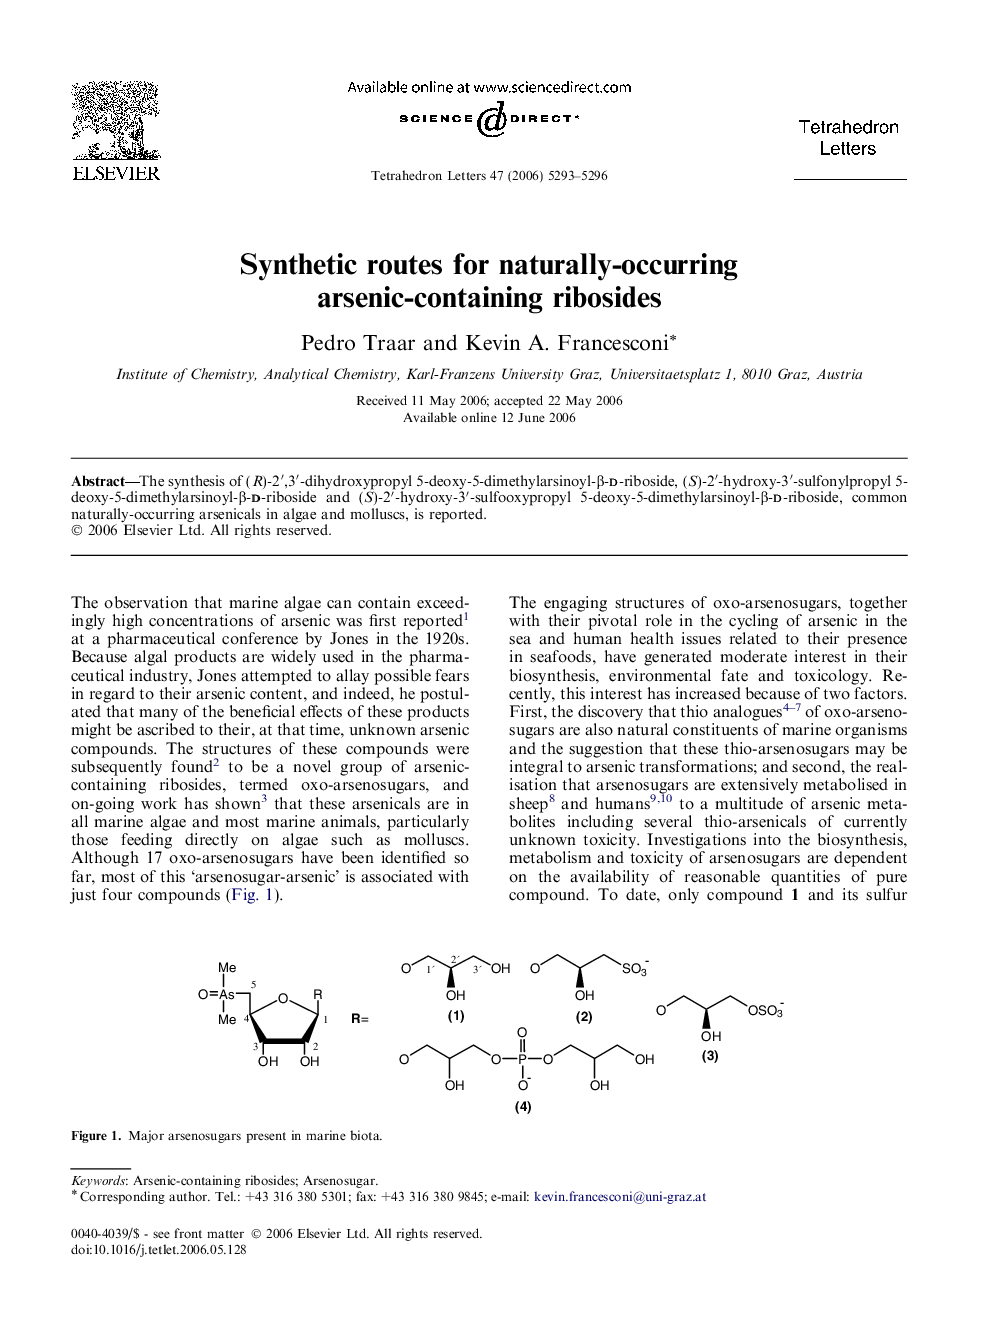 Synthetic routes for naturally-occurring arsenic-containing ribosides